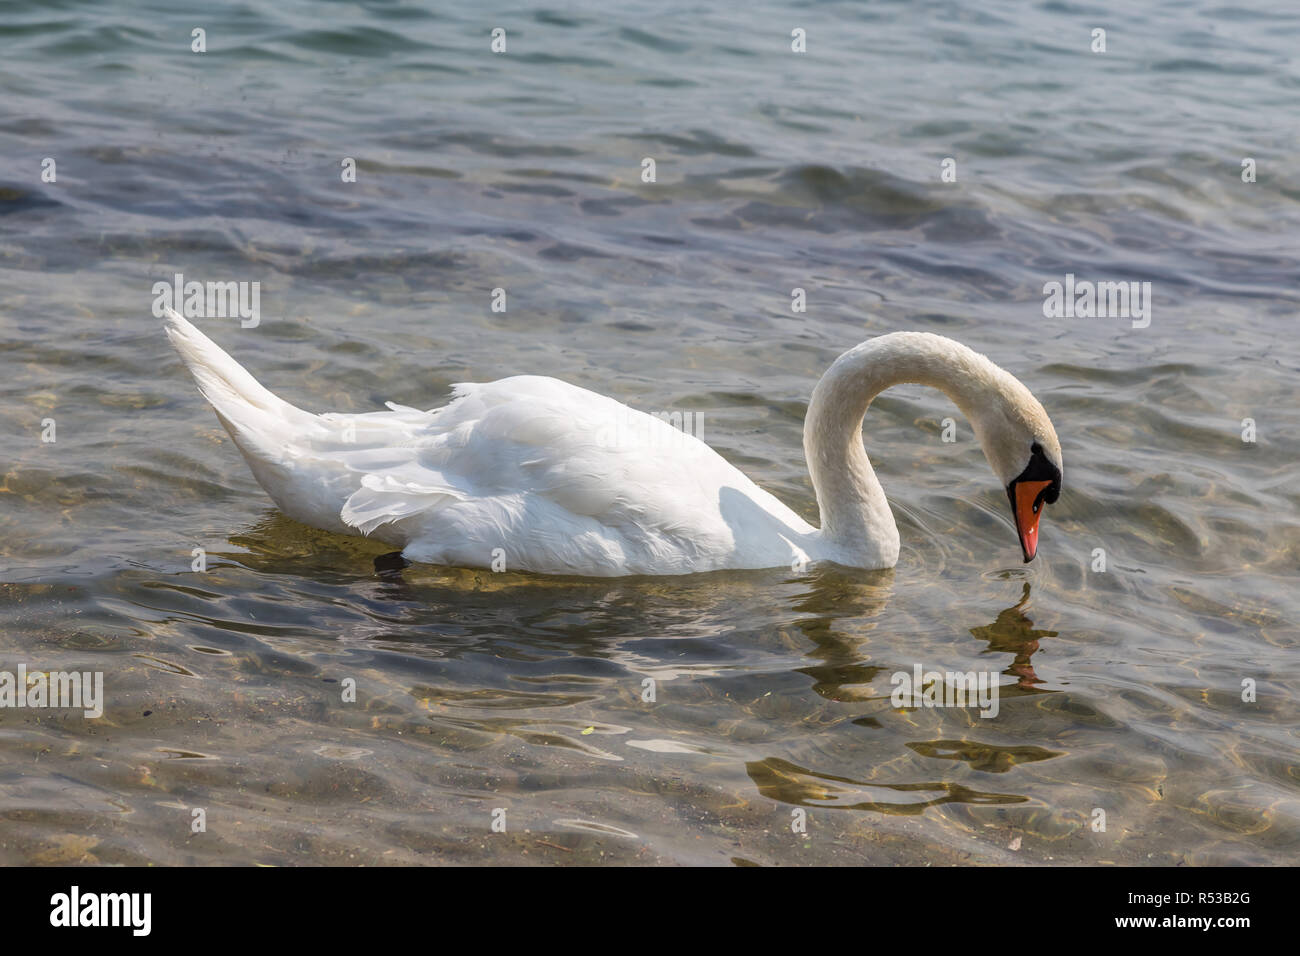 Lone swan swimming in a lake and looking down into the water. Stock Photo